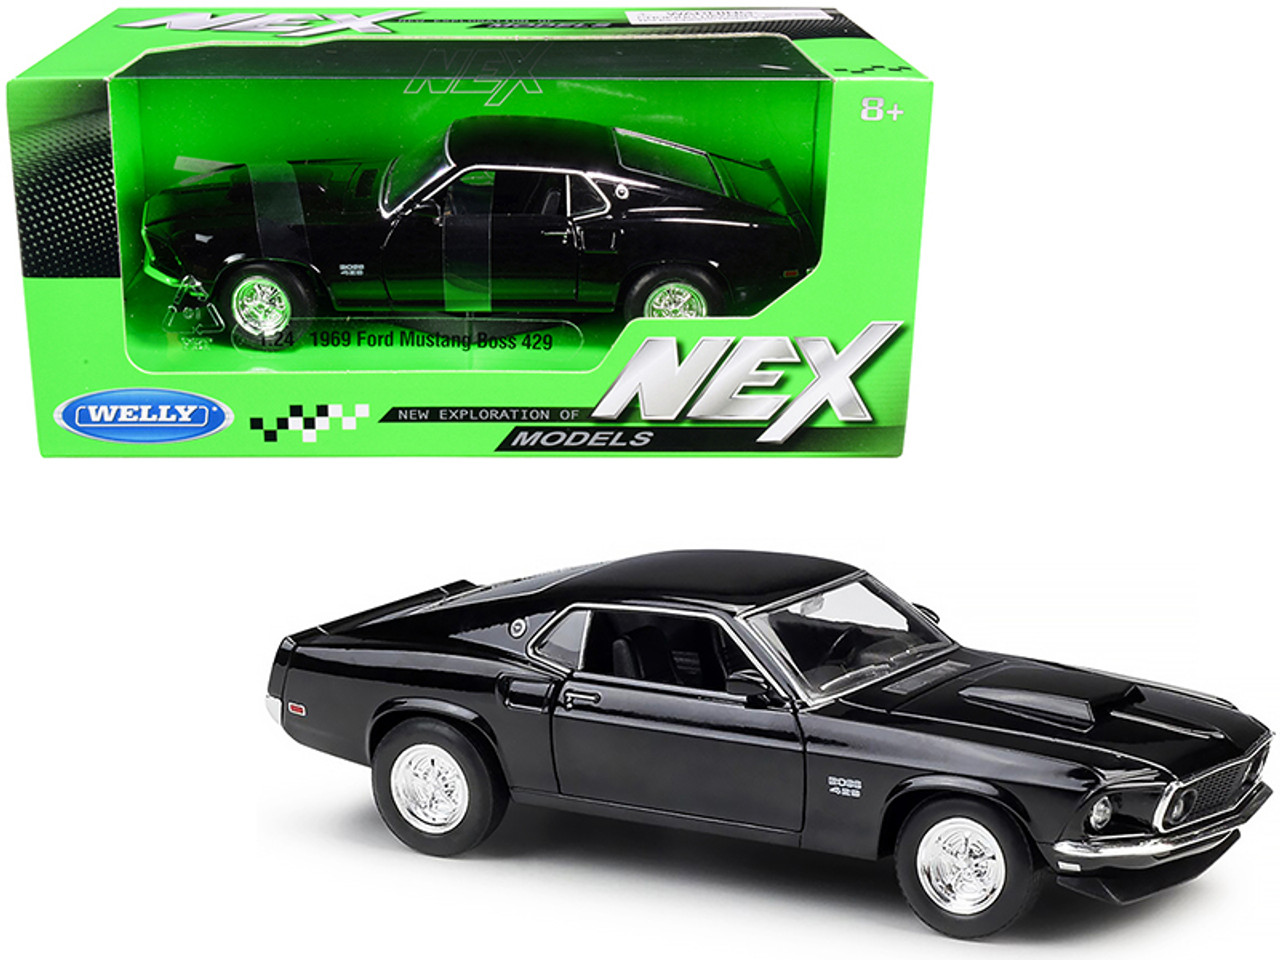 1969 Ford Mustang Boss 429 Black "NEX Models" 1/24 Diecast Model Car by Welly